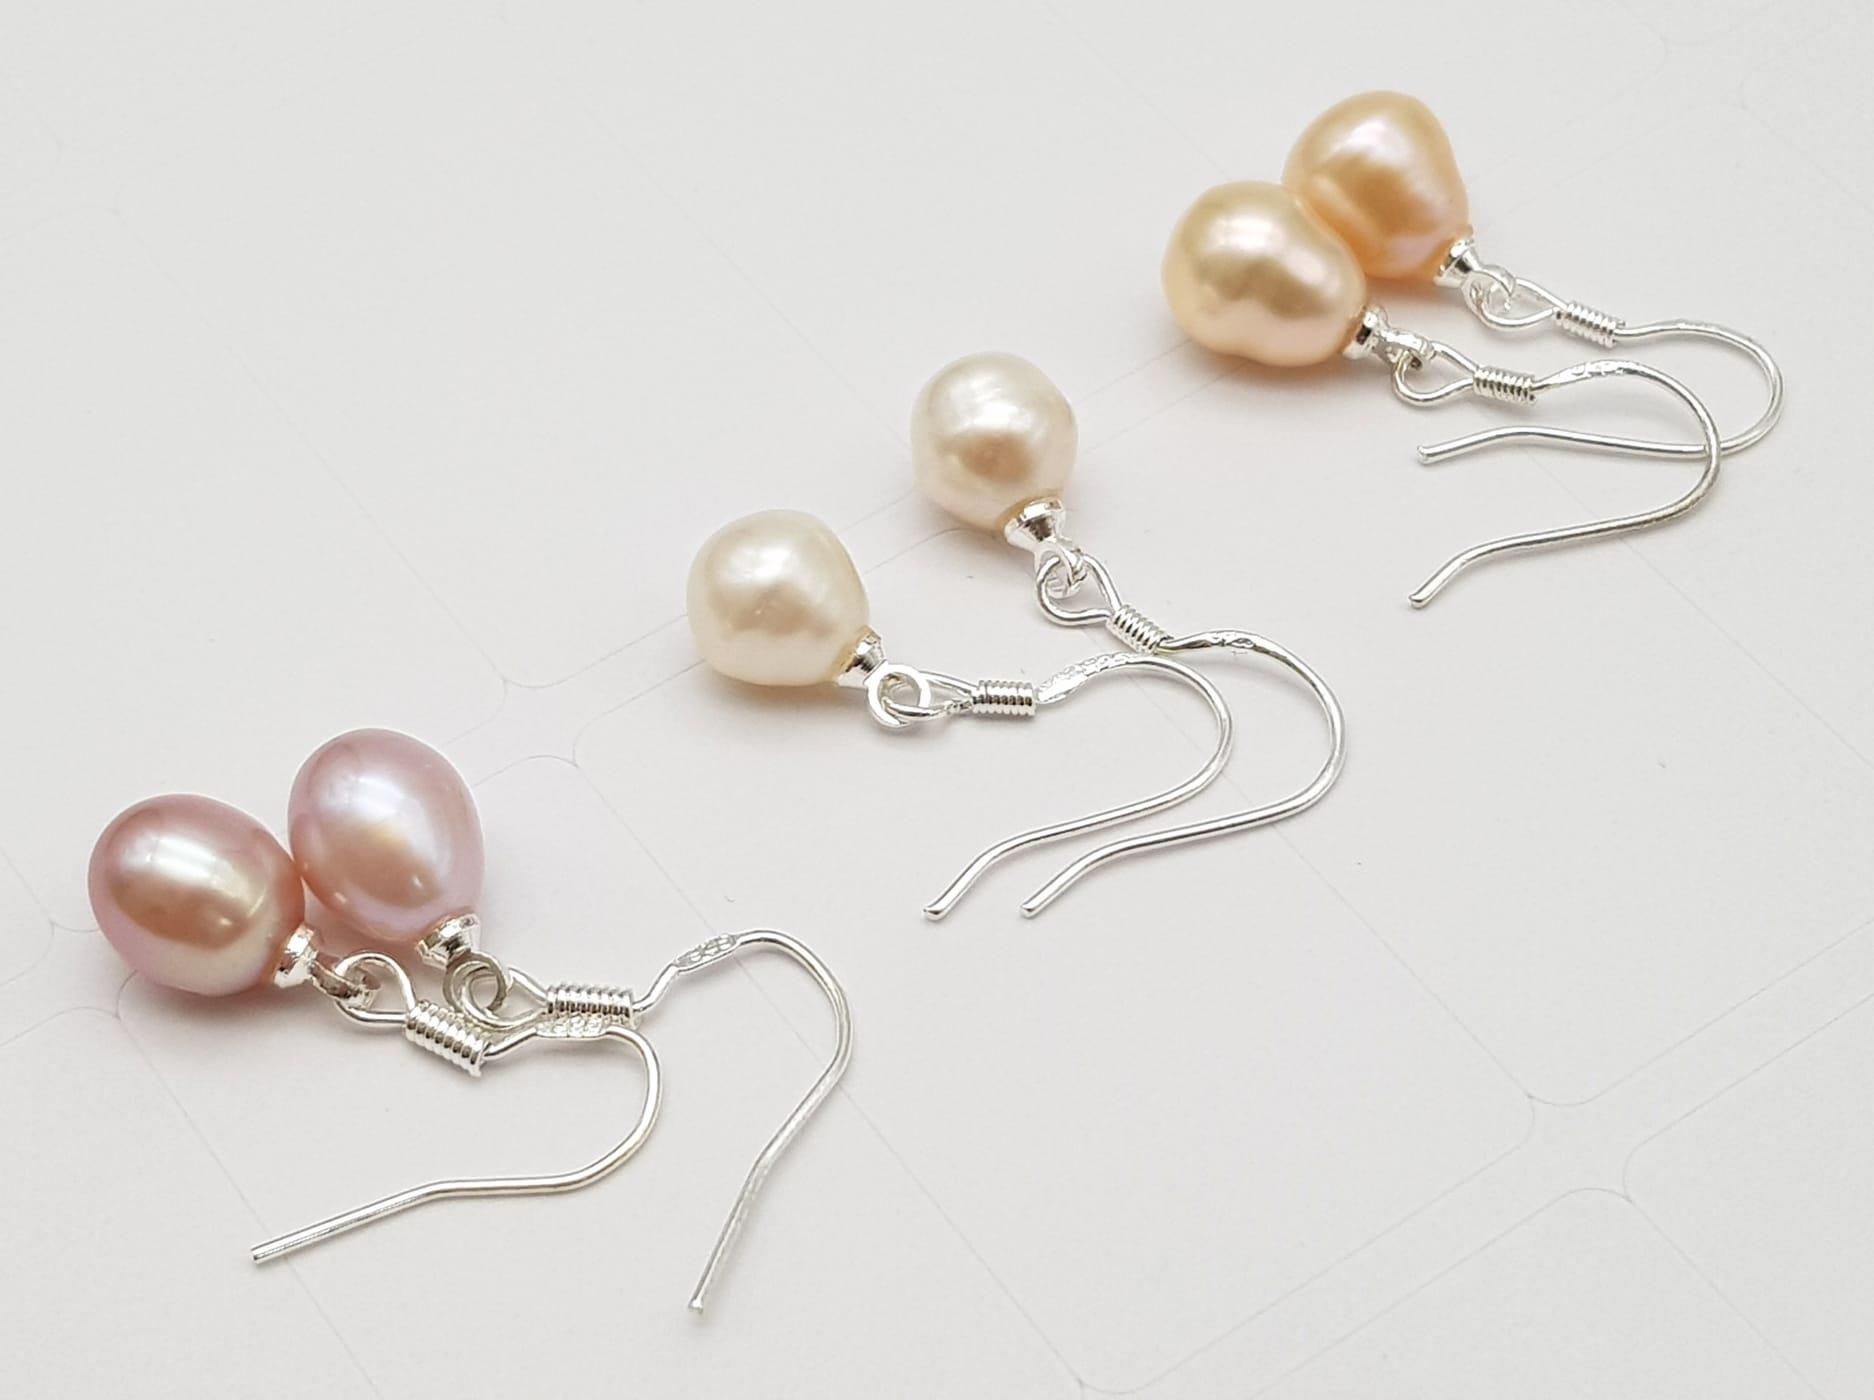 Three Pairs of Freshwater Pastel Shade Earrings. Set in 925 silver. - Image 2 of 4